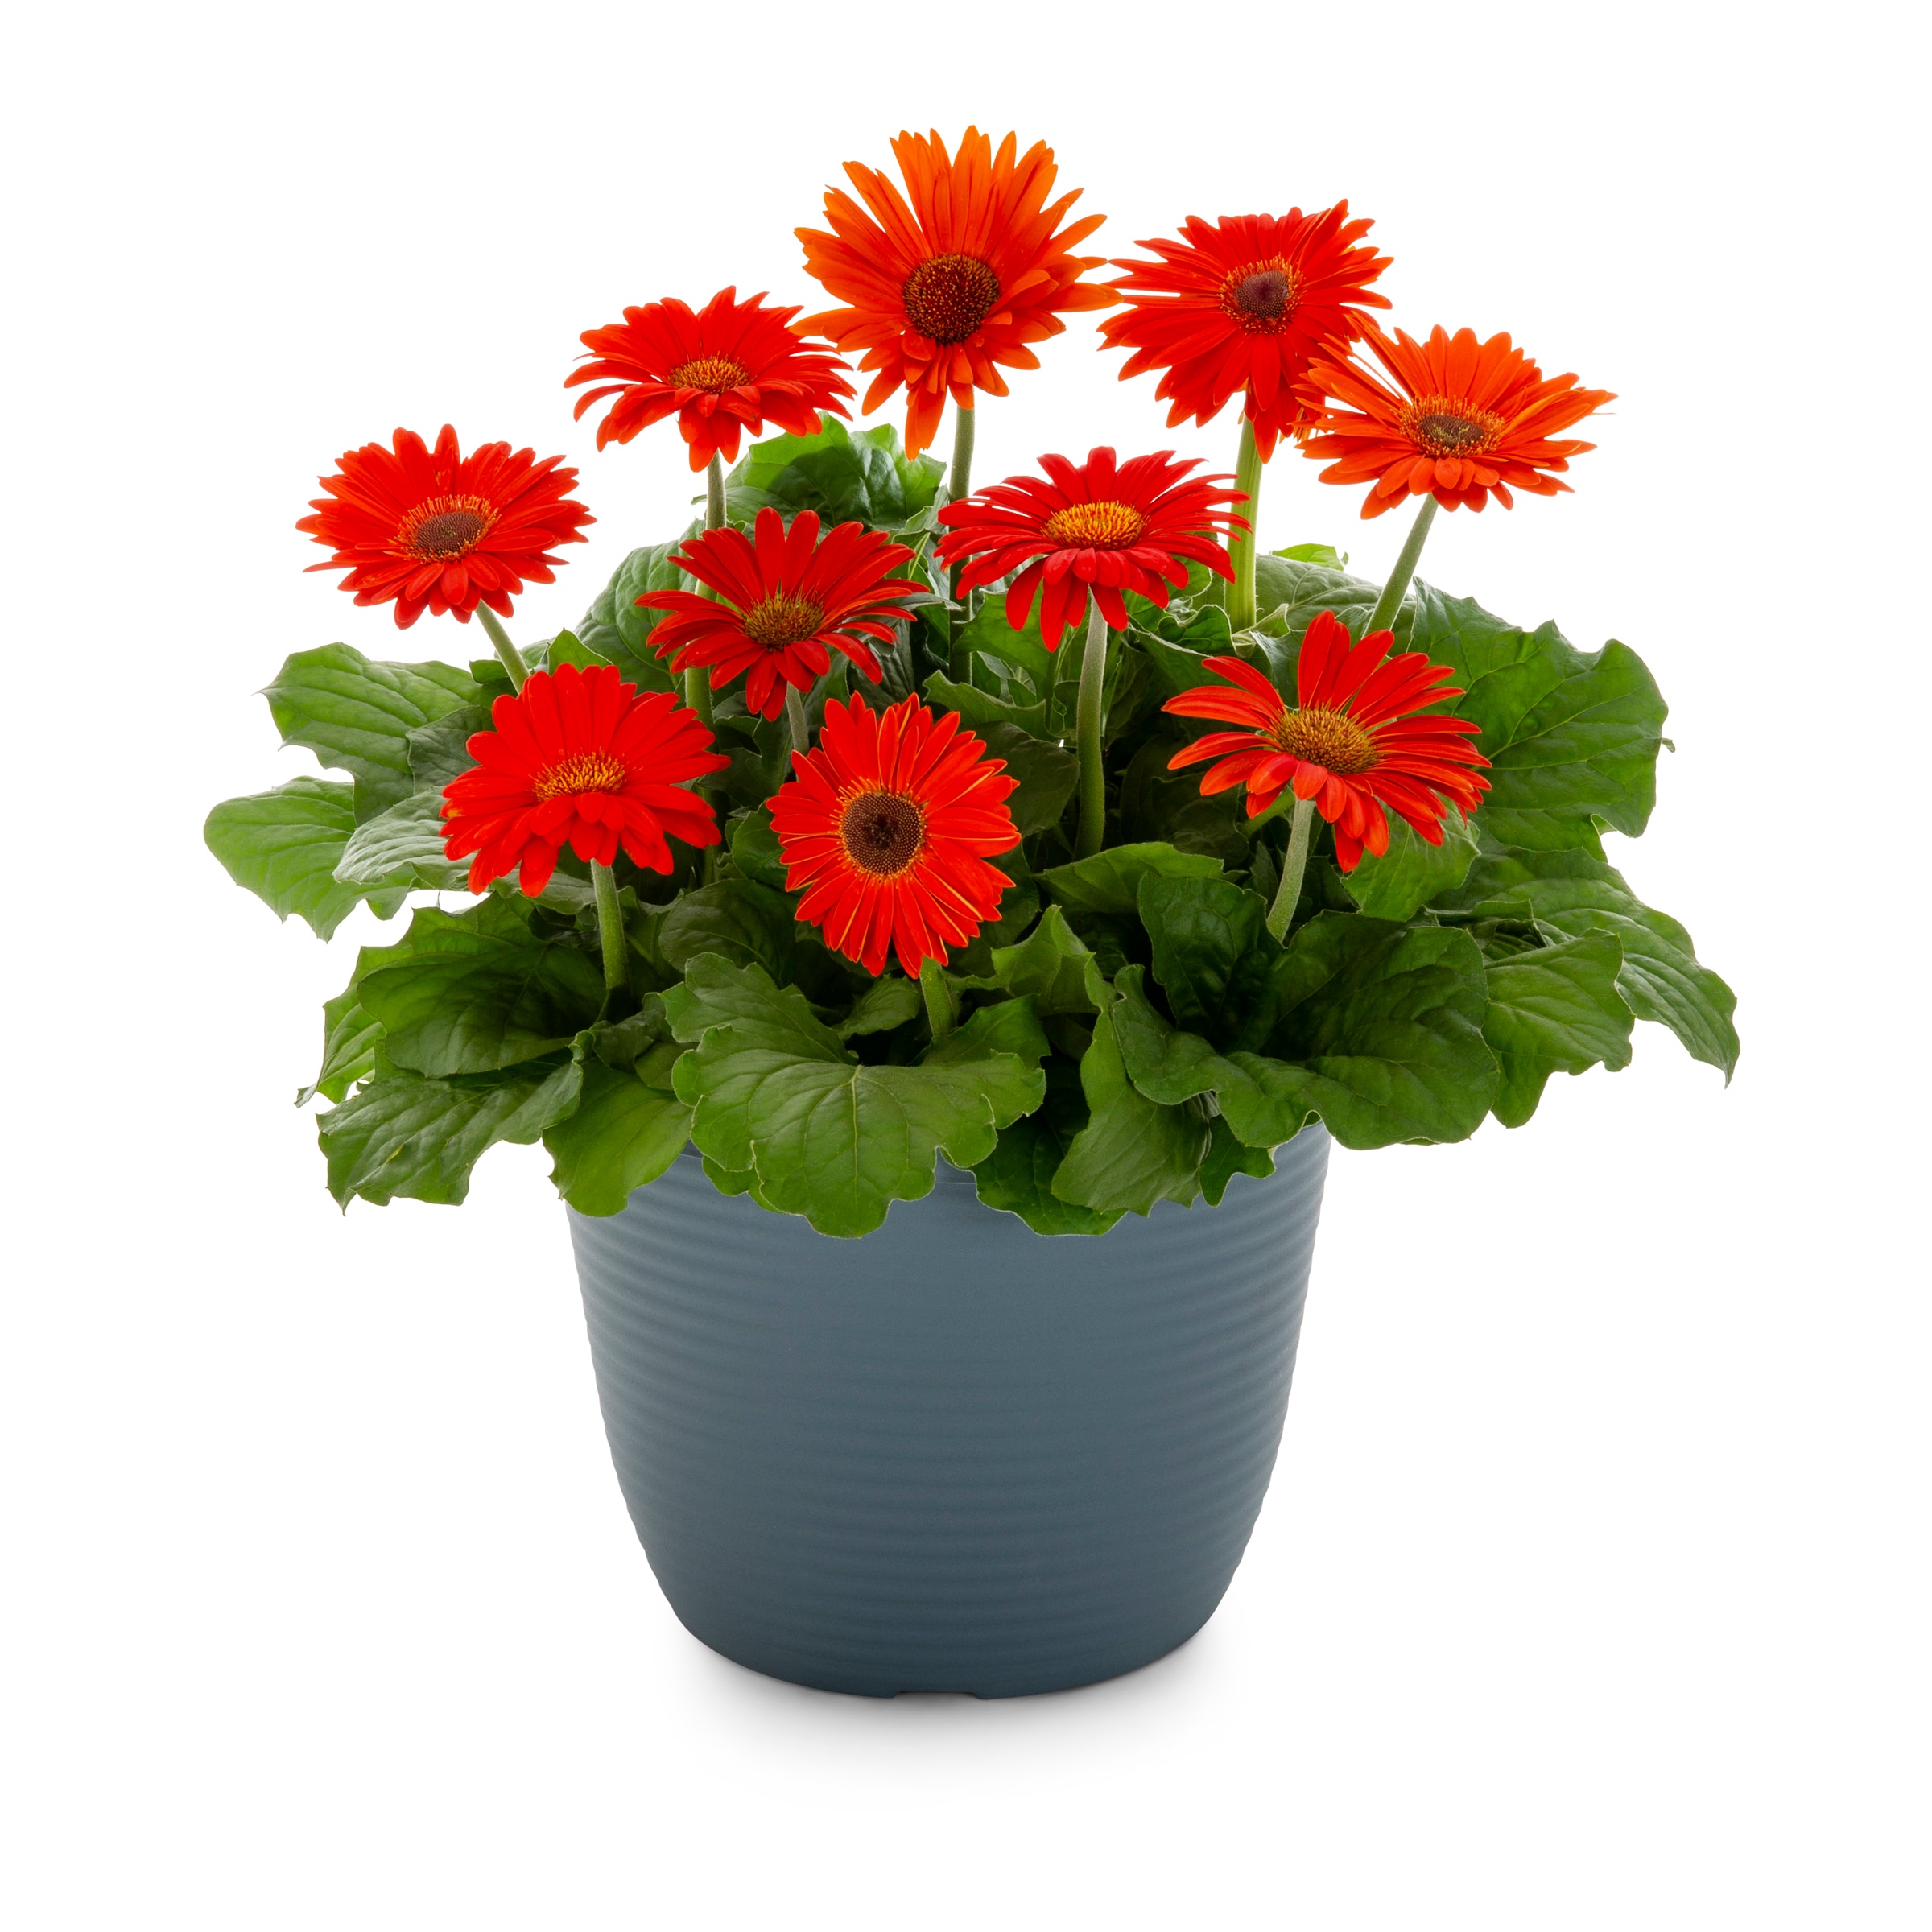 Lowe's Multicolor Gerbera Daisy 1.75-Gallon (s) Planter the Annuals department at Lowes.com